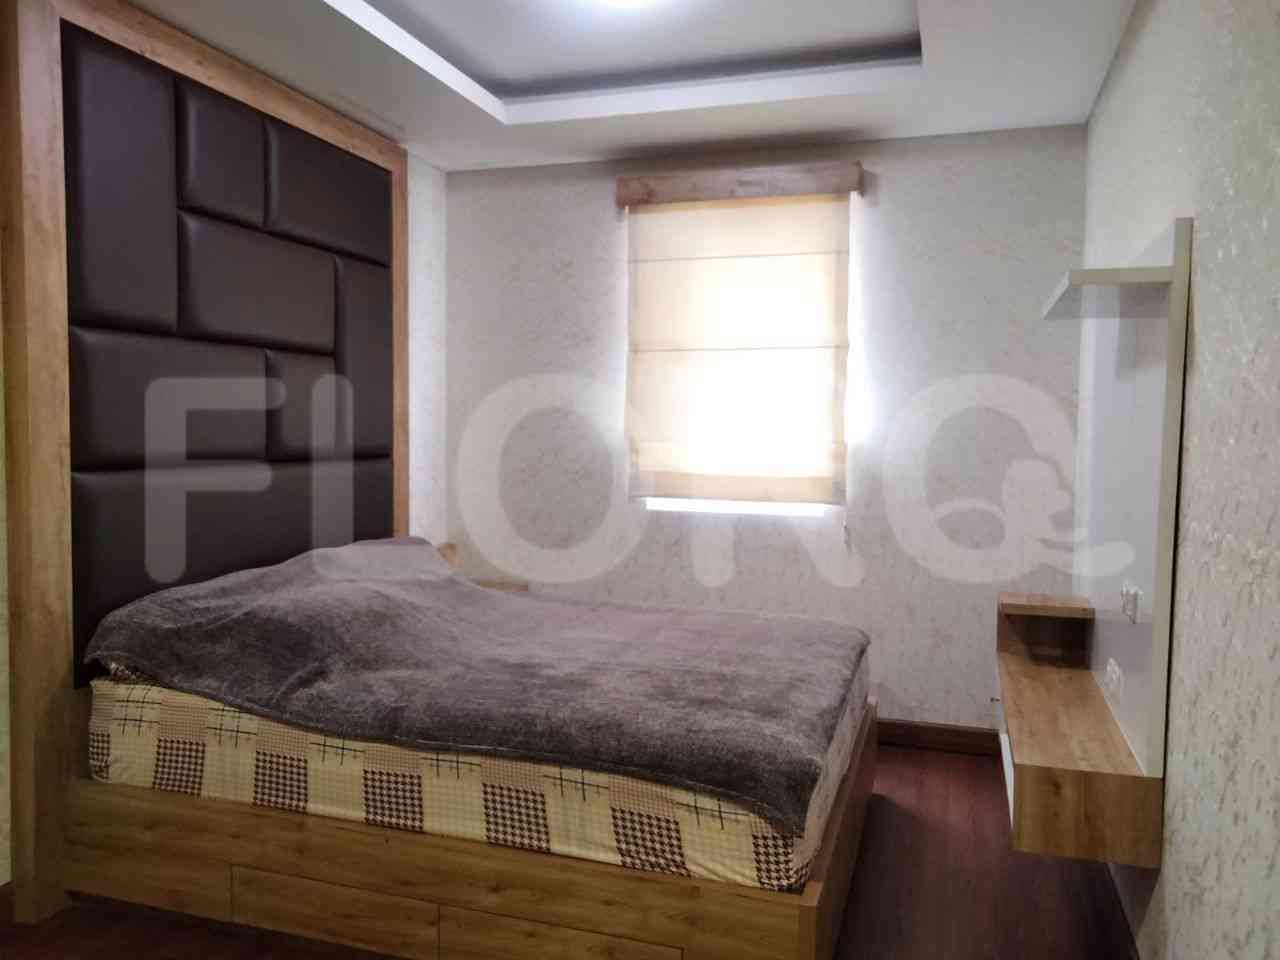 4 Bedroom on 12th Floor for Rent in Grand Palace Kemayoran - fke369 6